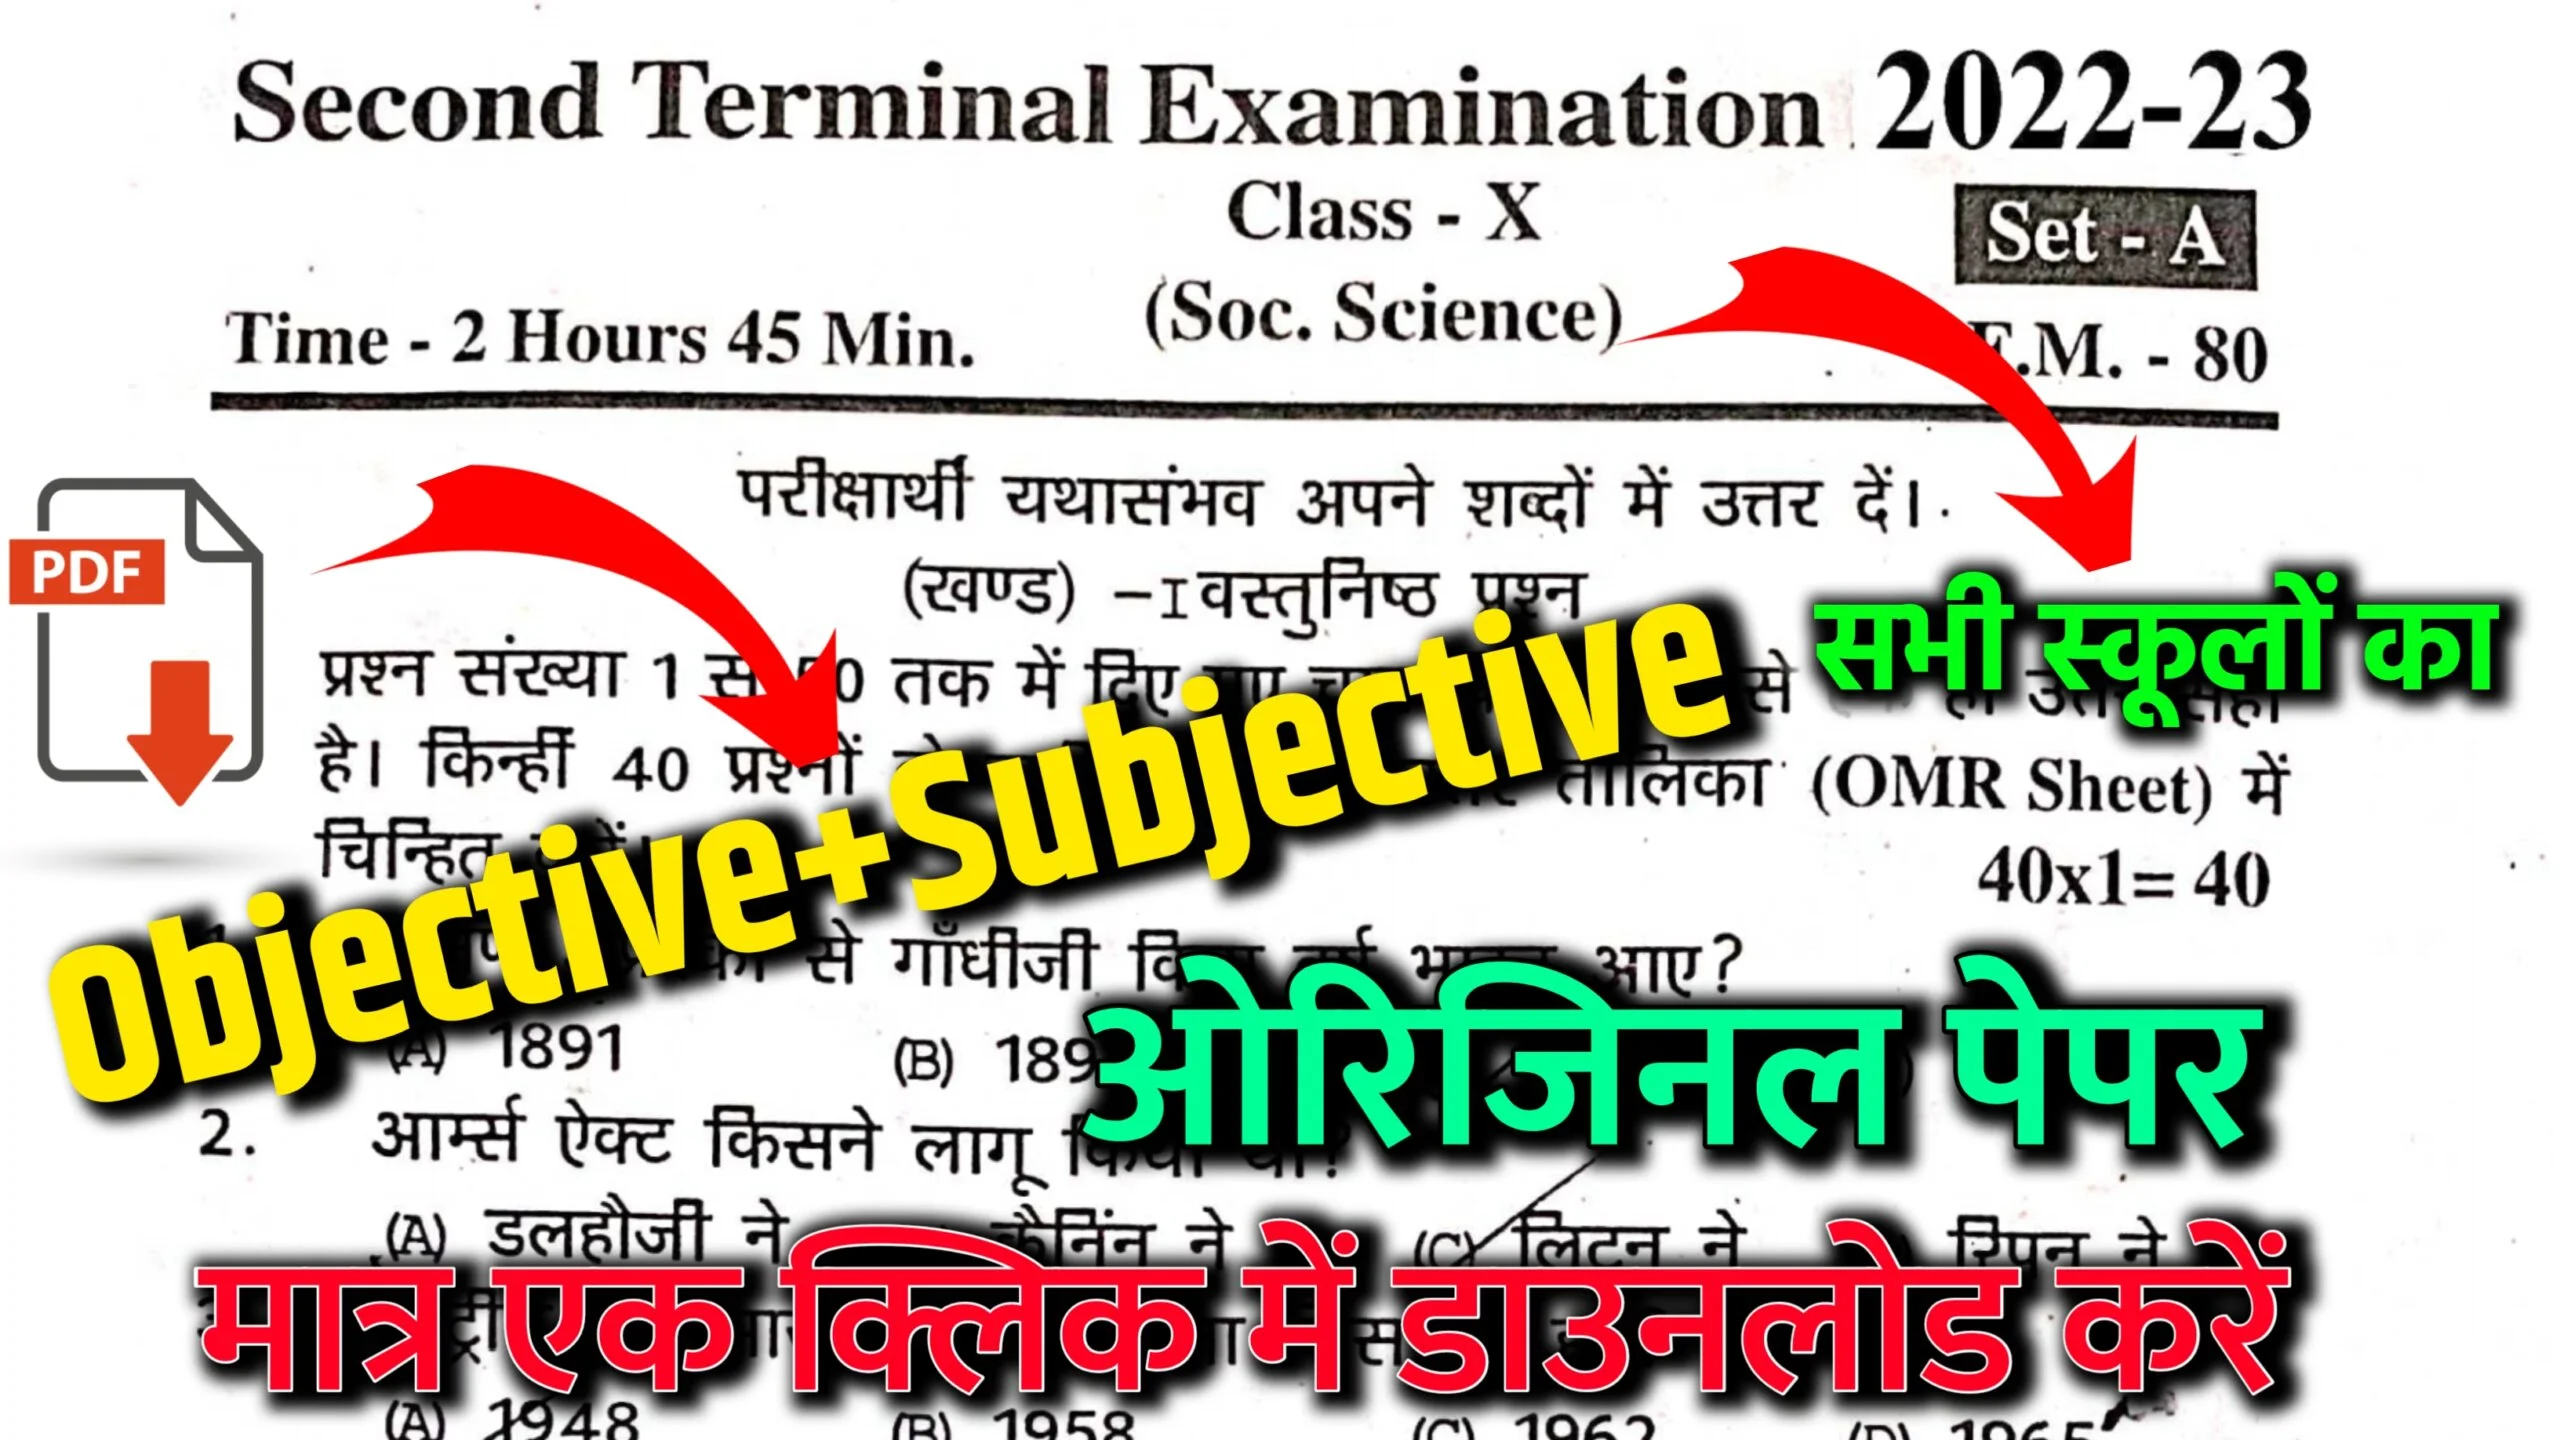 class 10th Social Science second terminal exam question paper 2022